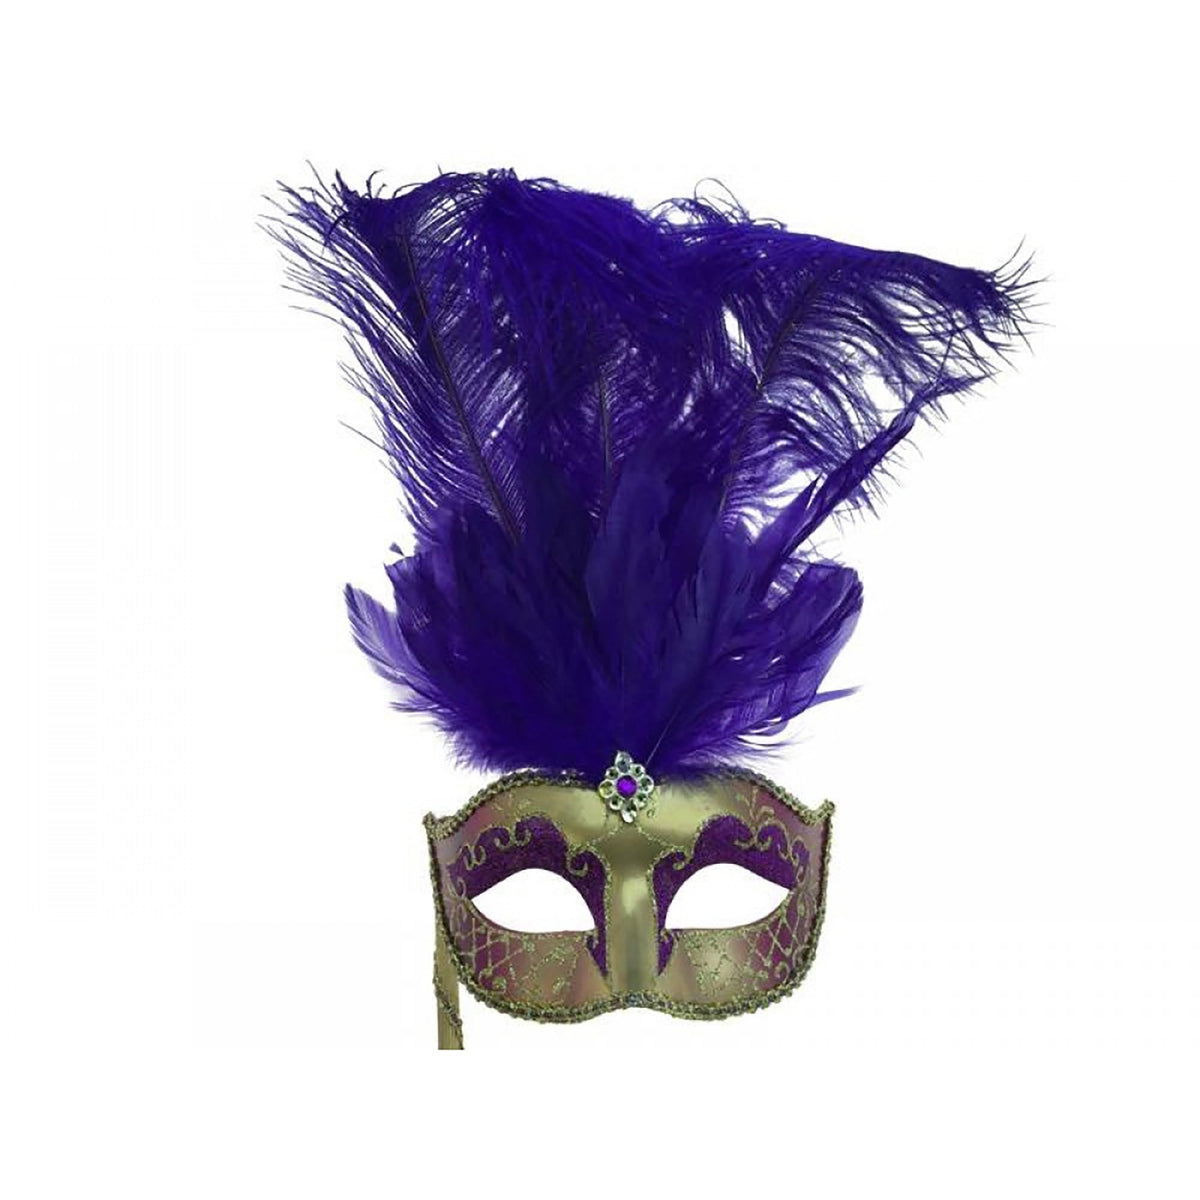 KBW GLOBAL CORP Costume Accessories Gold and Purple Venetian Mask with Ostrich Feathers and Stick, 1 Count 831687011276